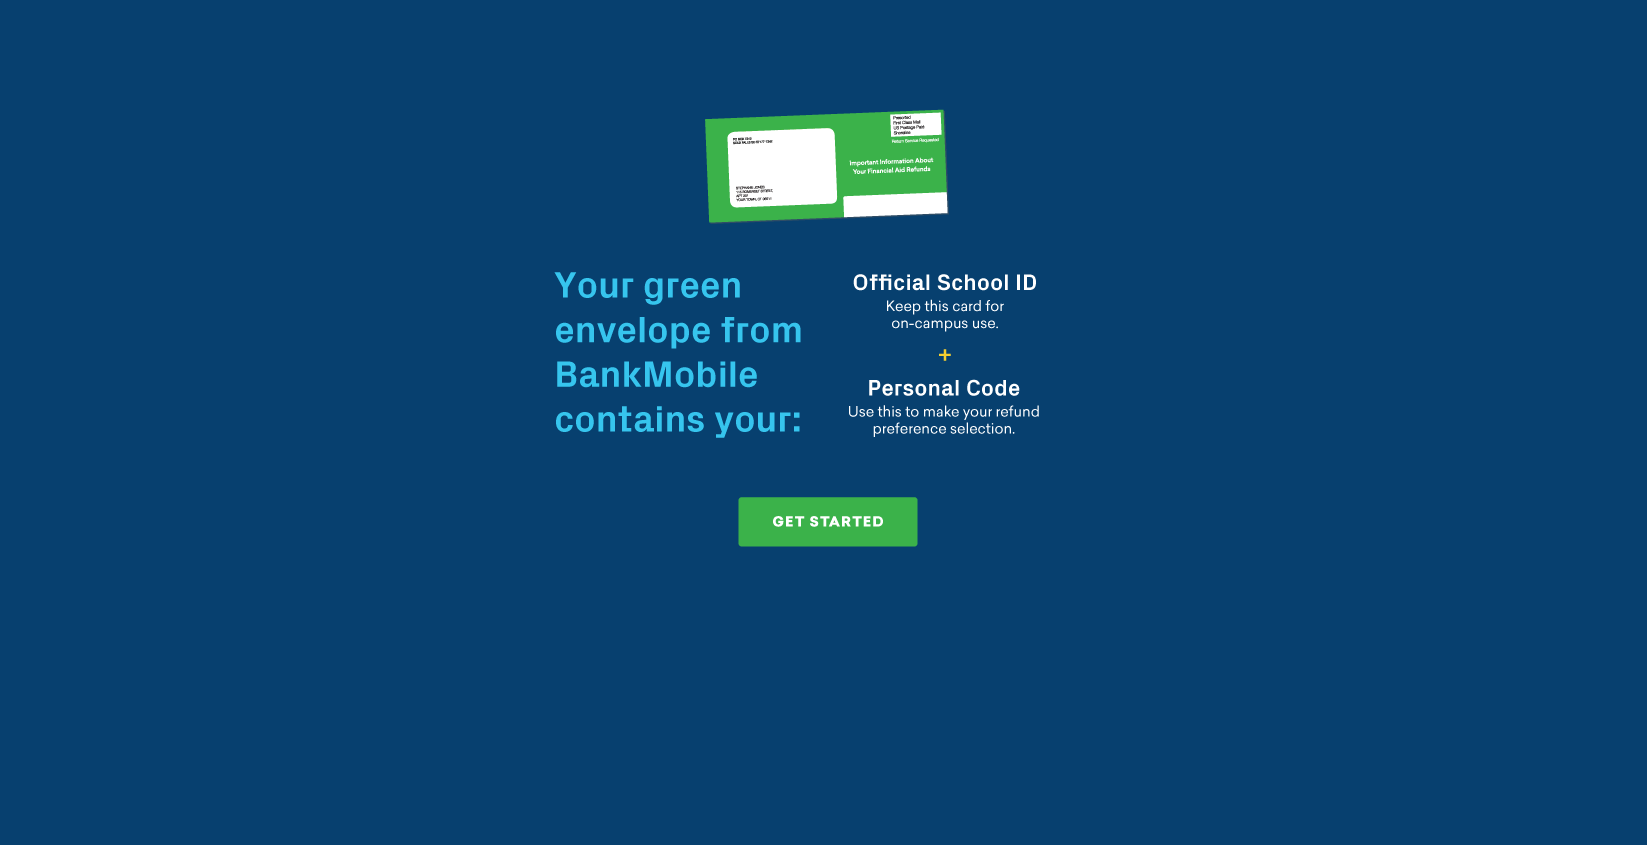 Your green envelope from BankMobile contains your official school ID and Personal Code.